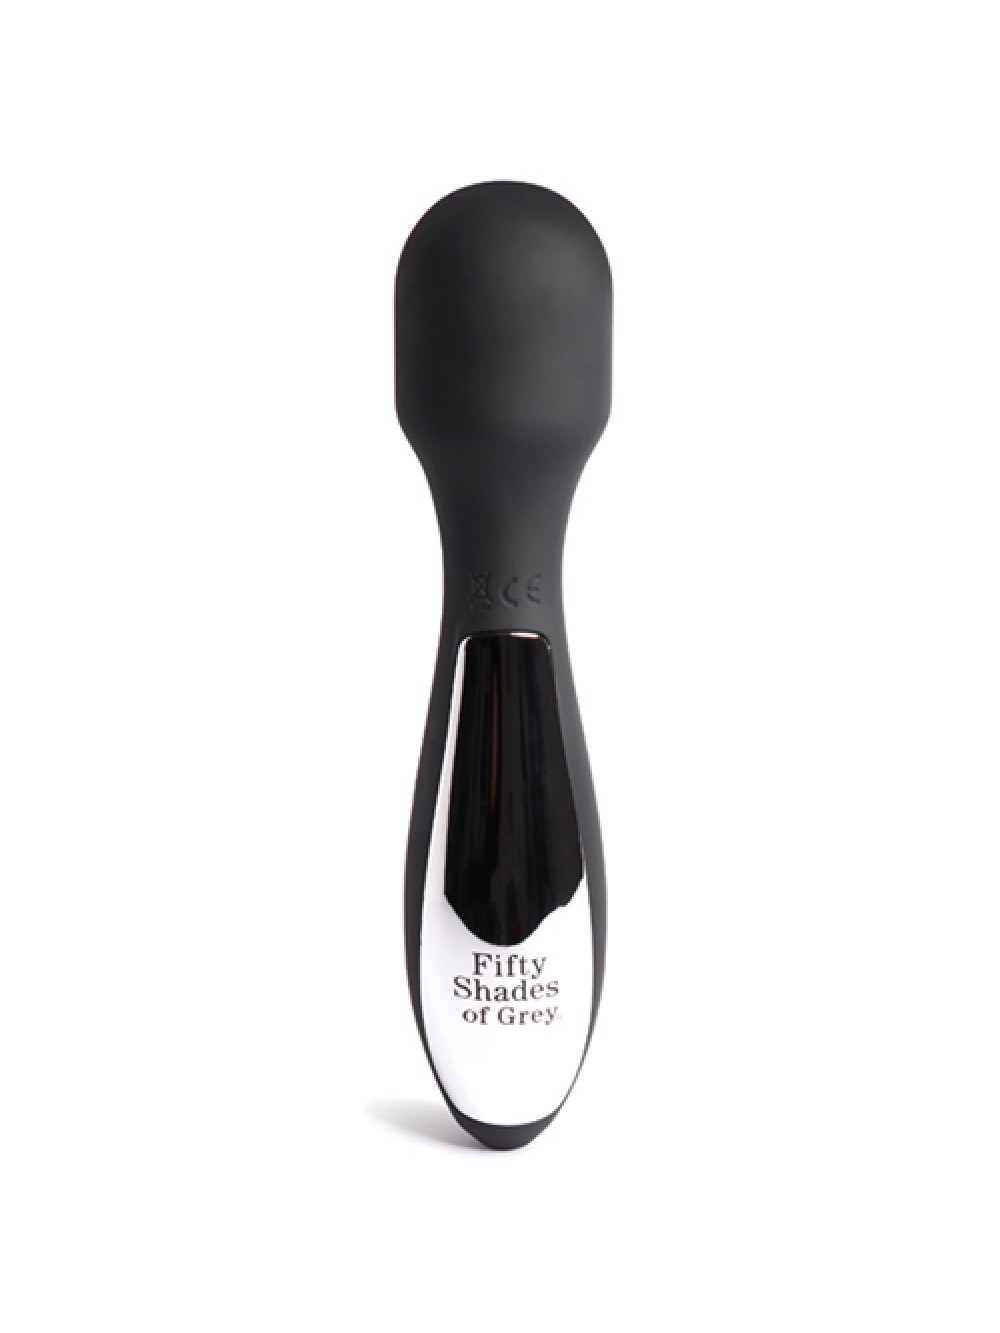 Fifty Shades of Grey - Rechargeable Wand Vibrator 5060108815703